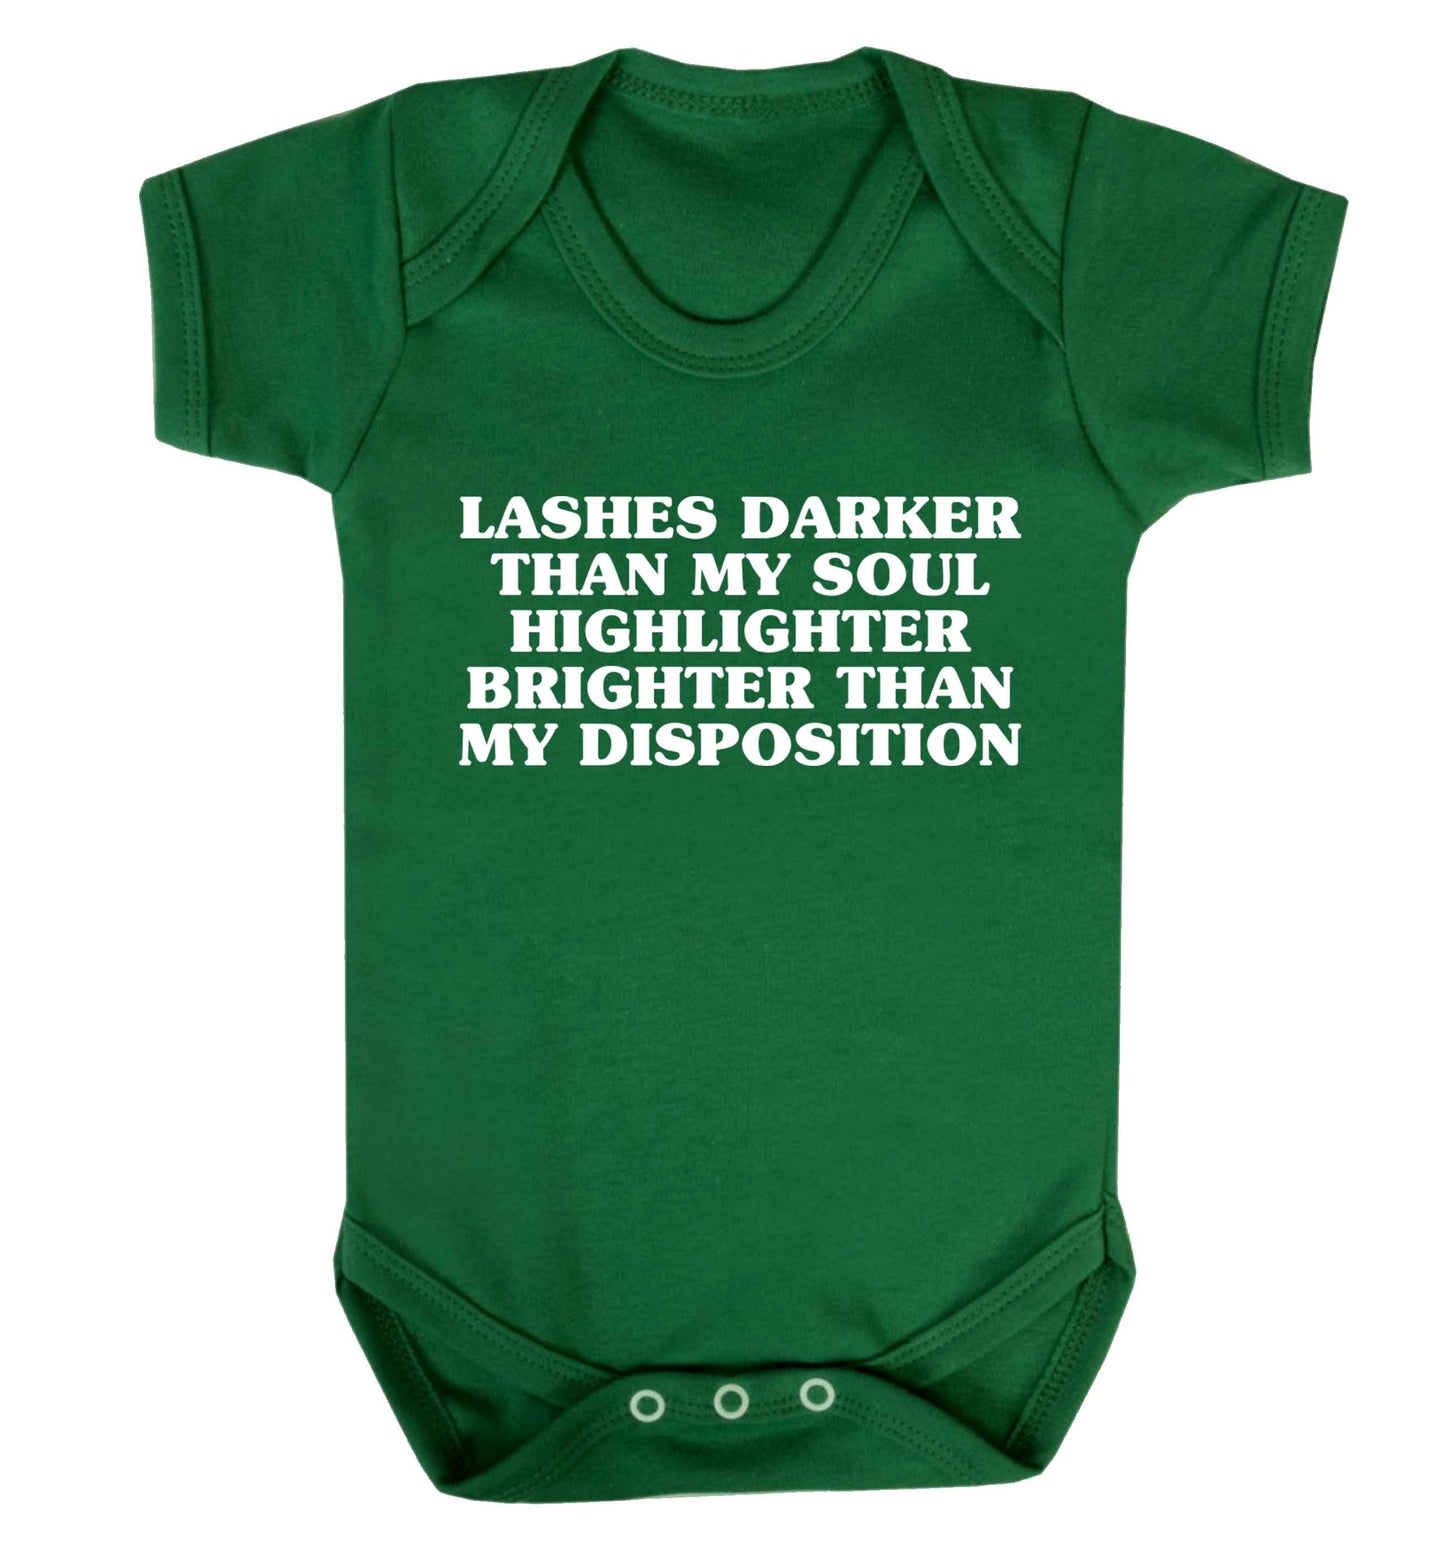 Lashes darker than my soul, highlighter brighter than my disposition Baby Vest green 18-24 months